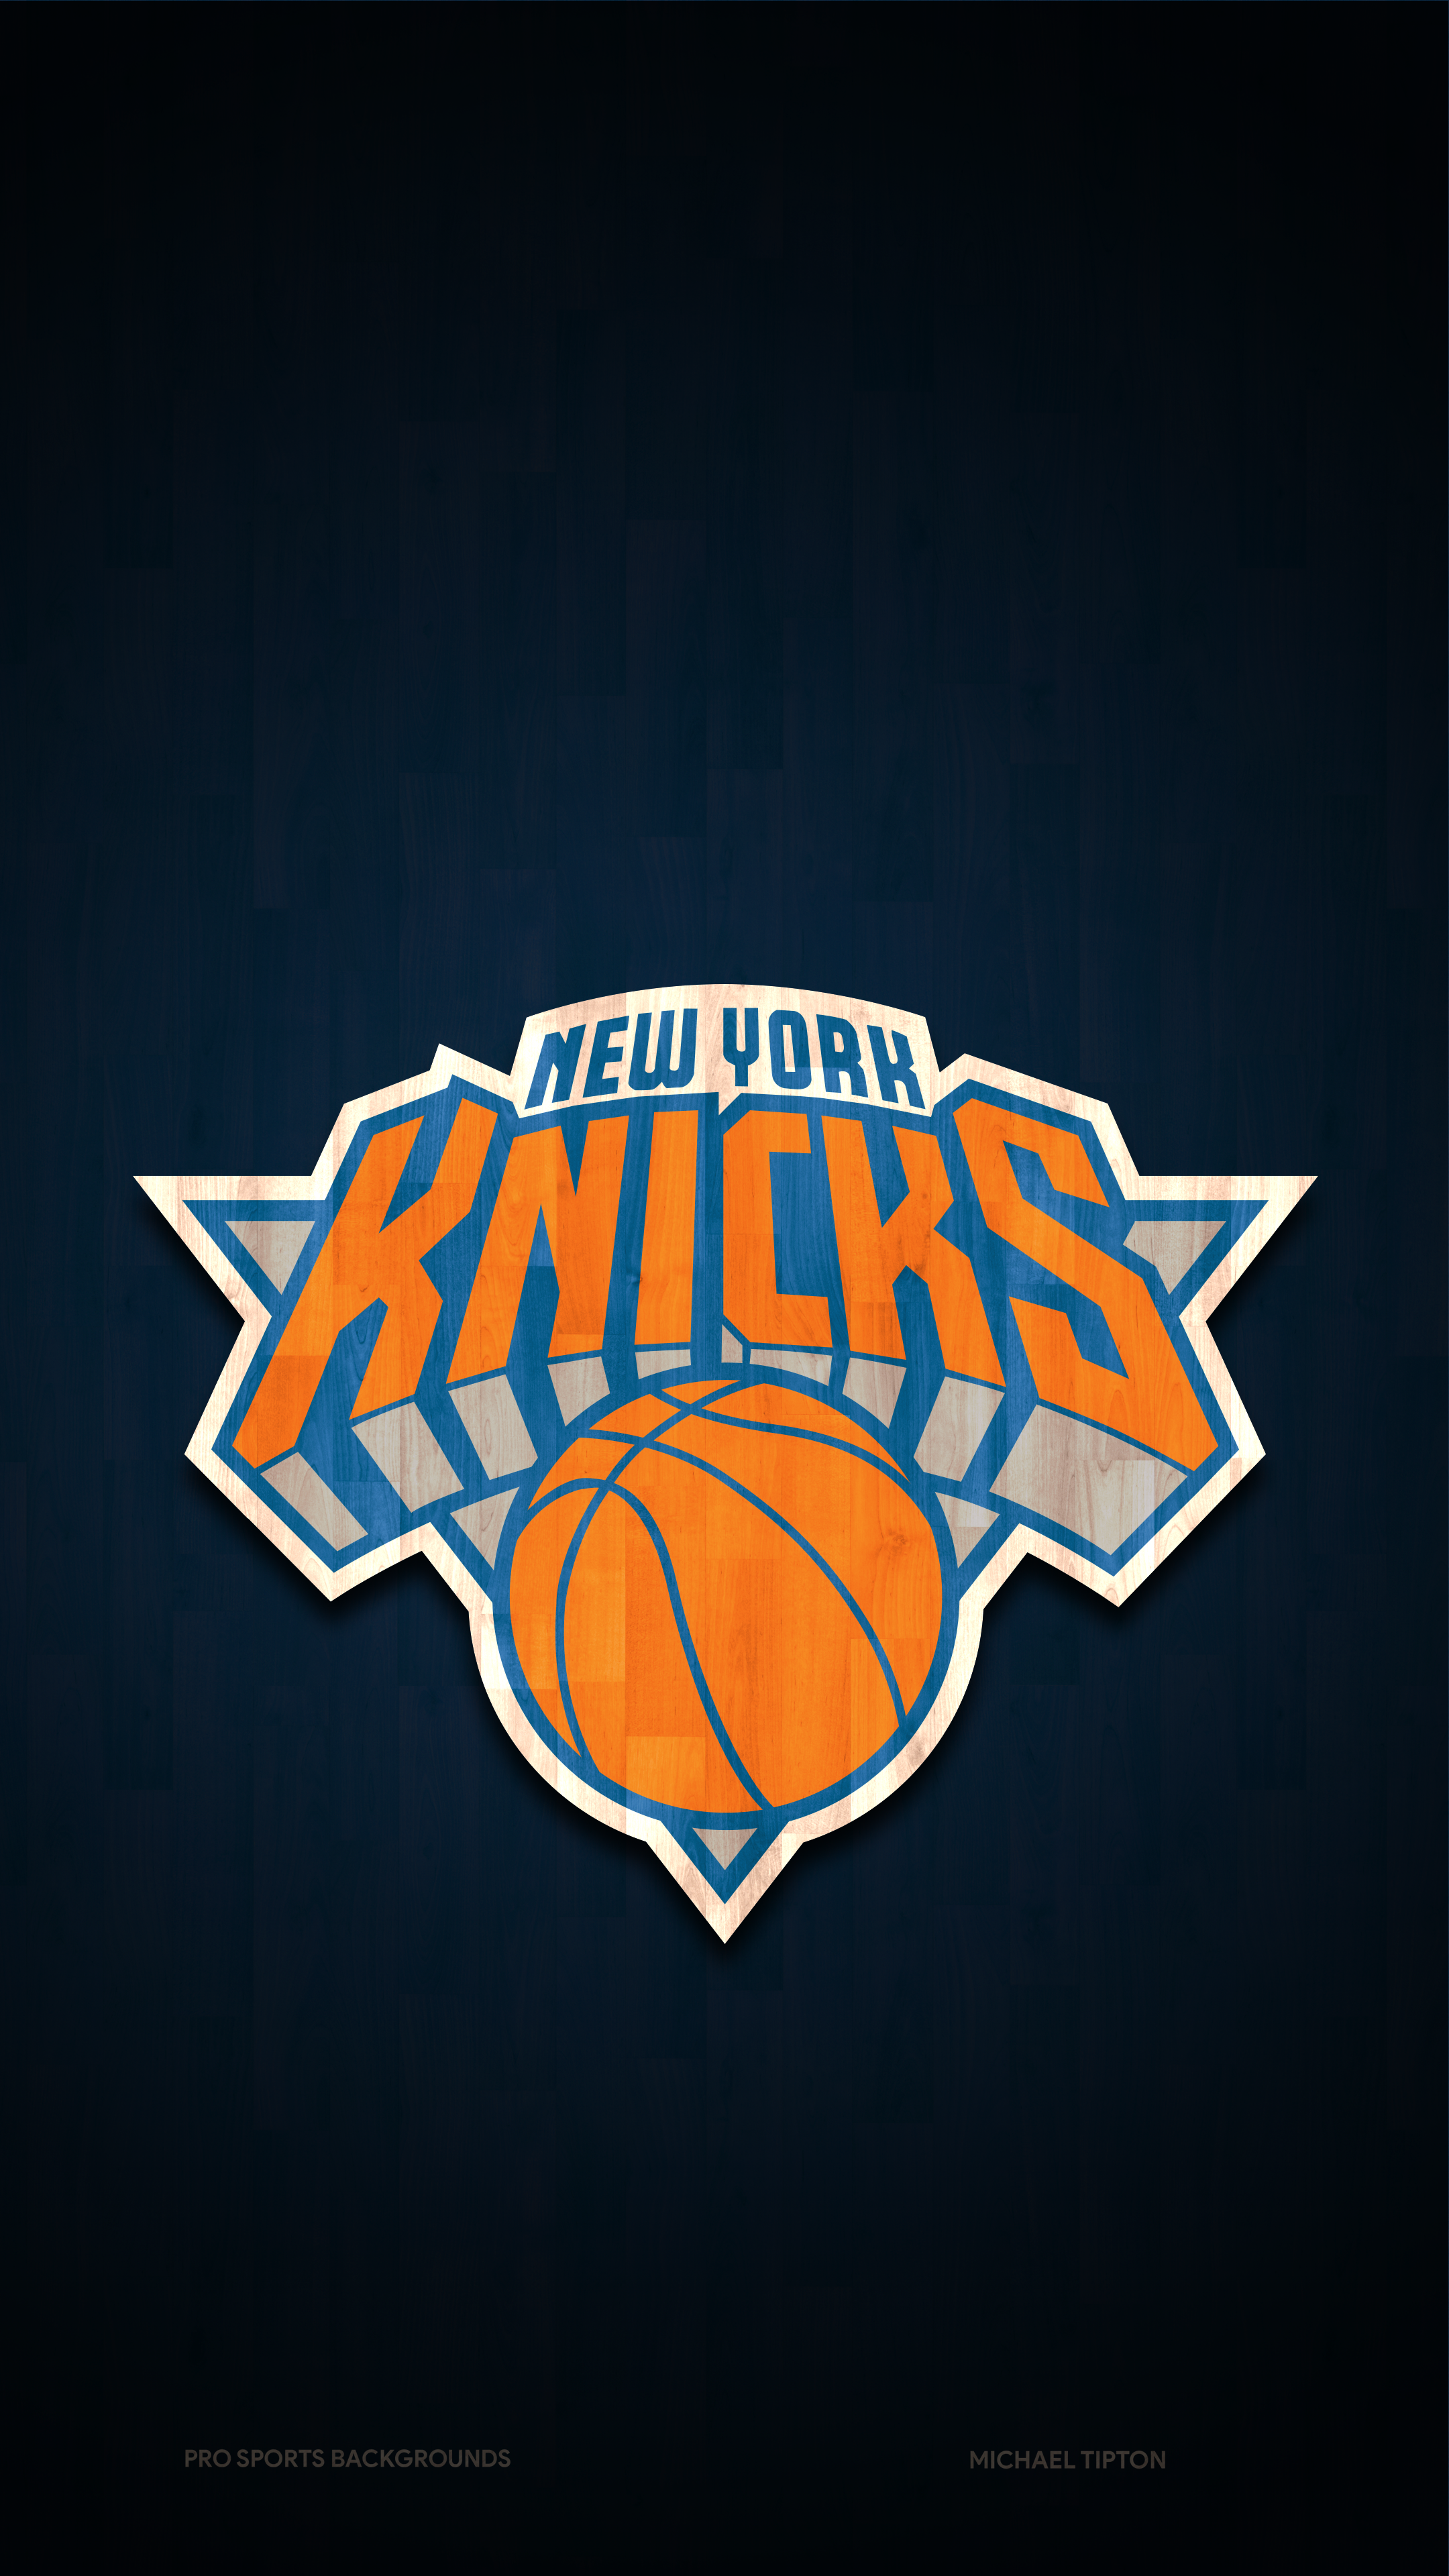 NEW YORK KNICKS on Twitter Time to adjust those wallpapers for this  doubledouble machine  J30RANDLE  WallpaperWednesday  httpstcoZfZqYMMNiS  Twitter